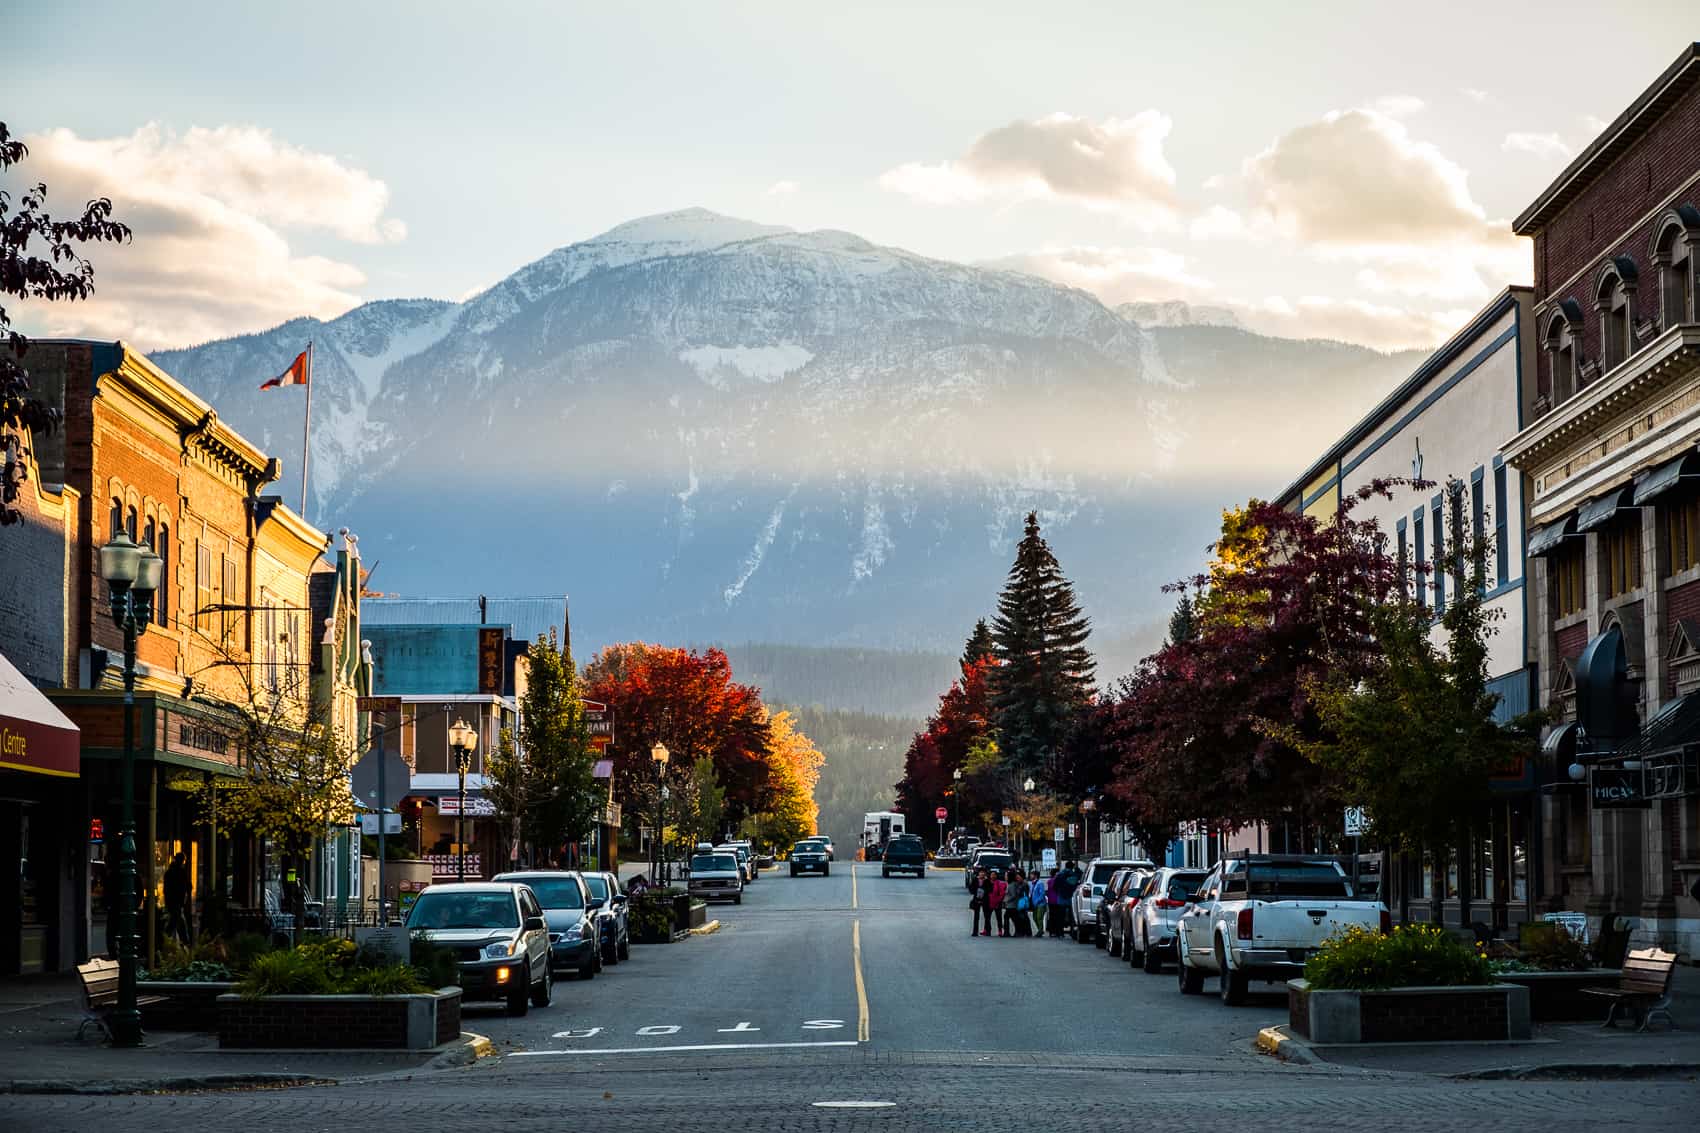 Season and Climate - Downtown Revelstoke in Fall